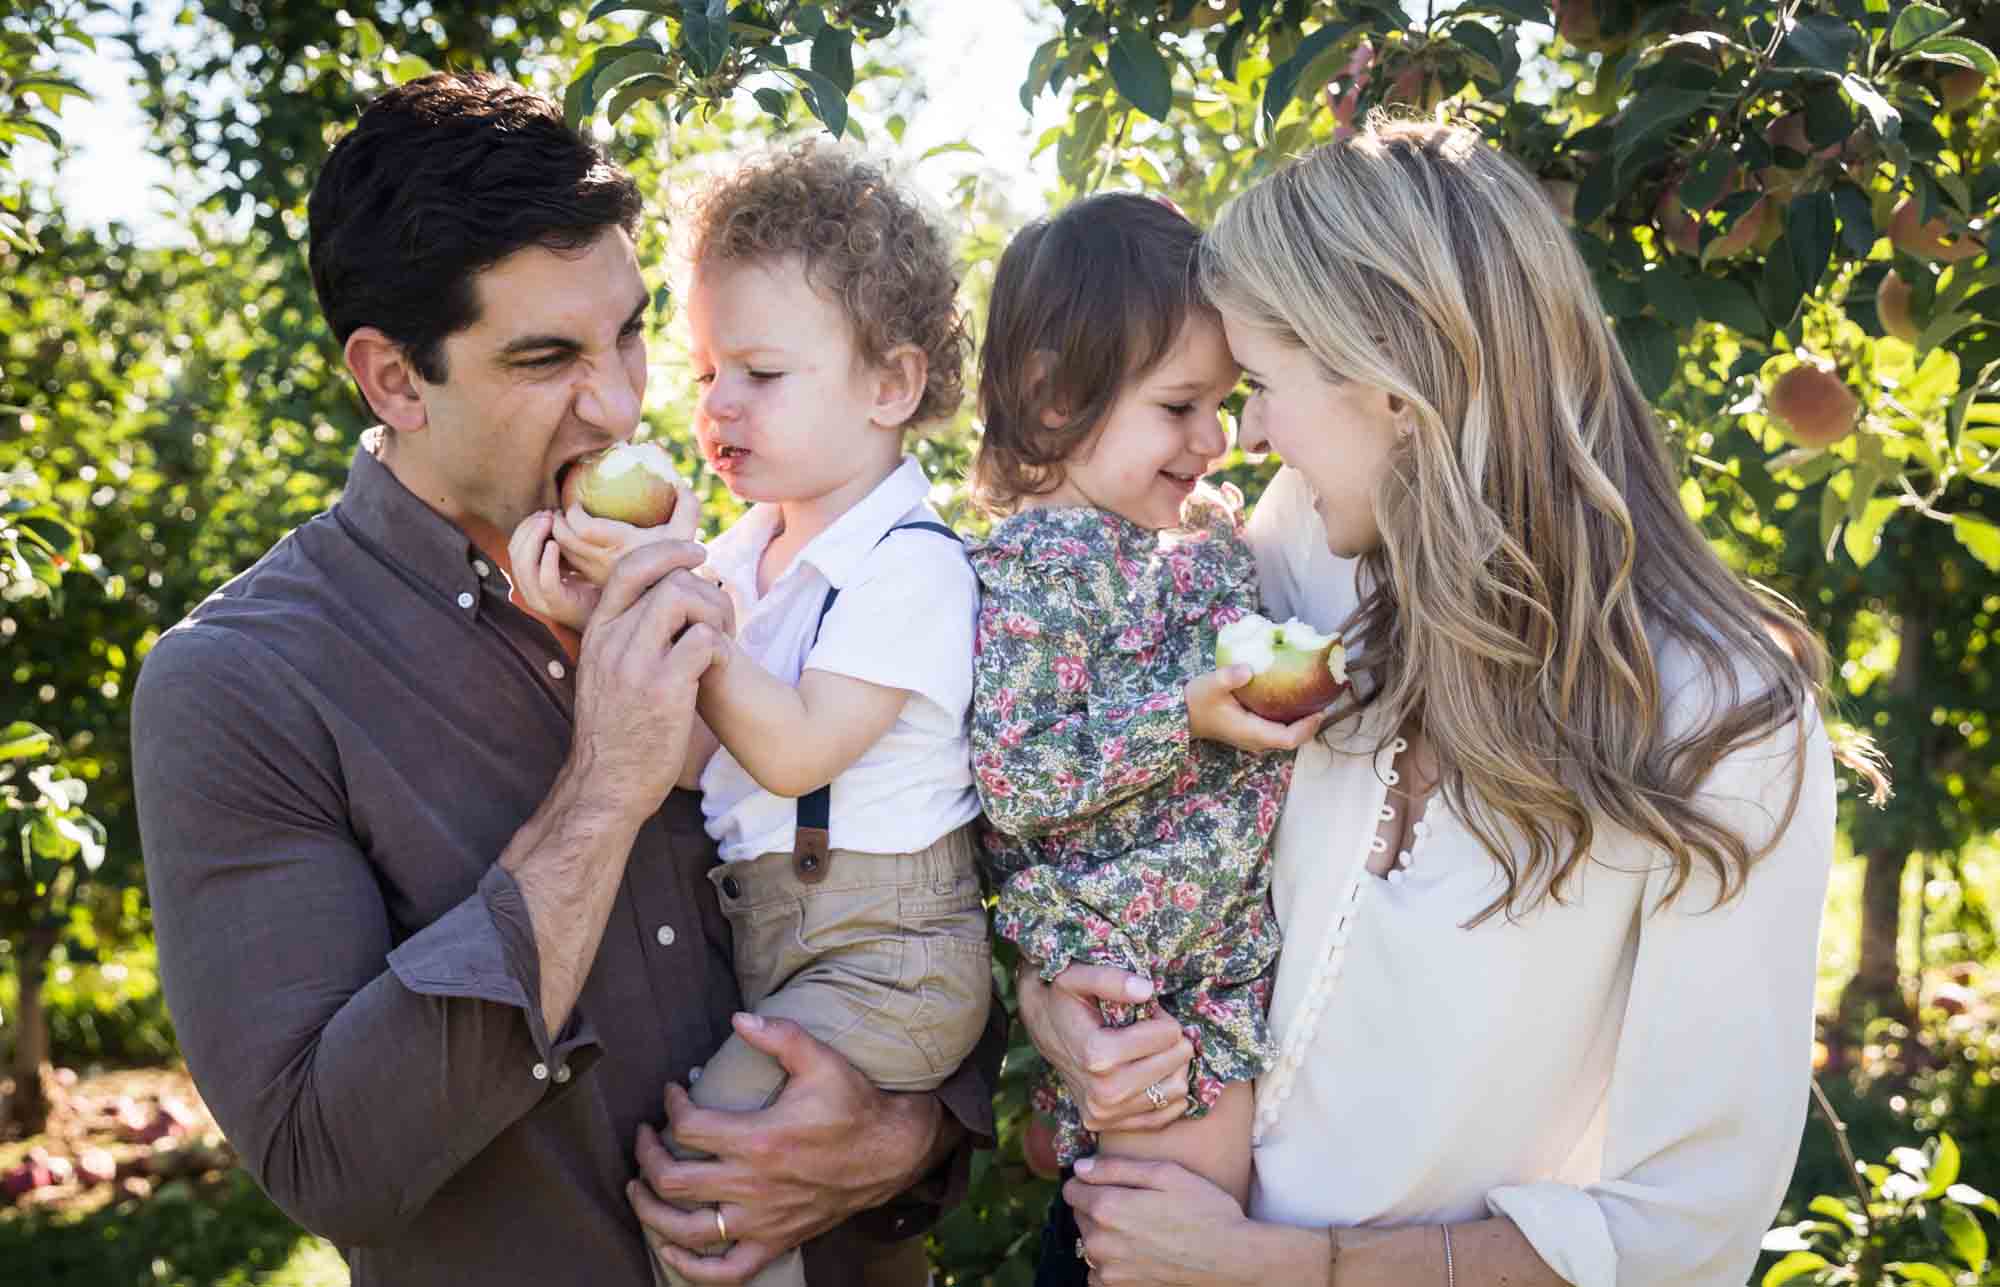 Mother and father holding toddlers in an orchard for an article on tips for apple picking family photos